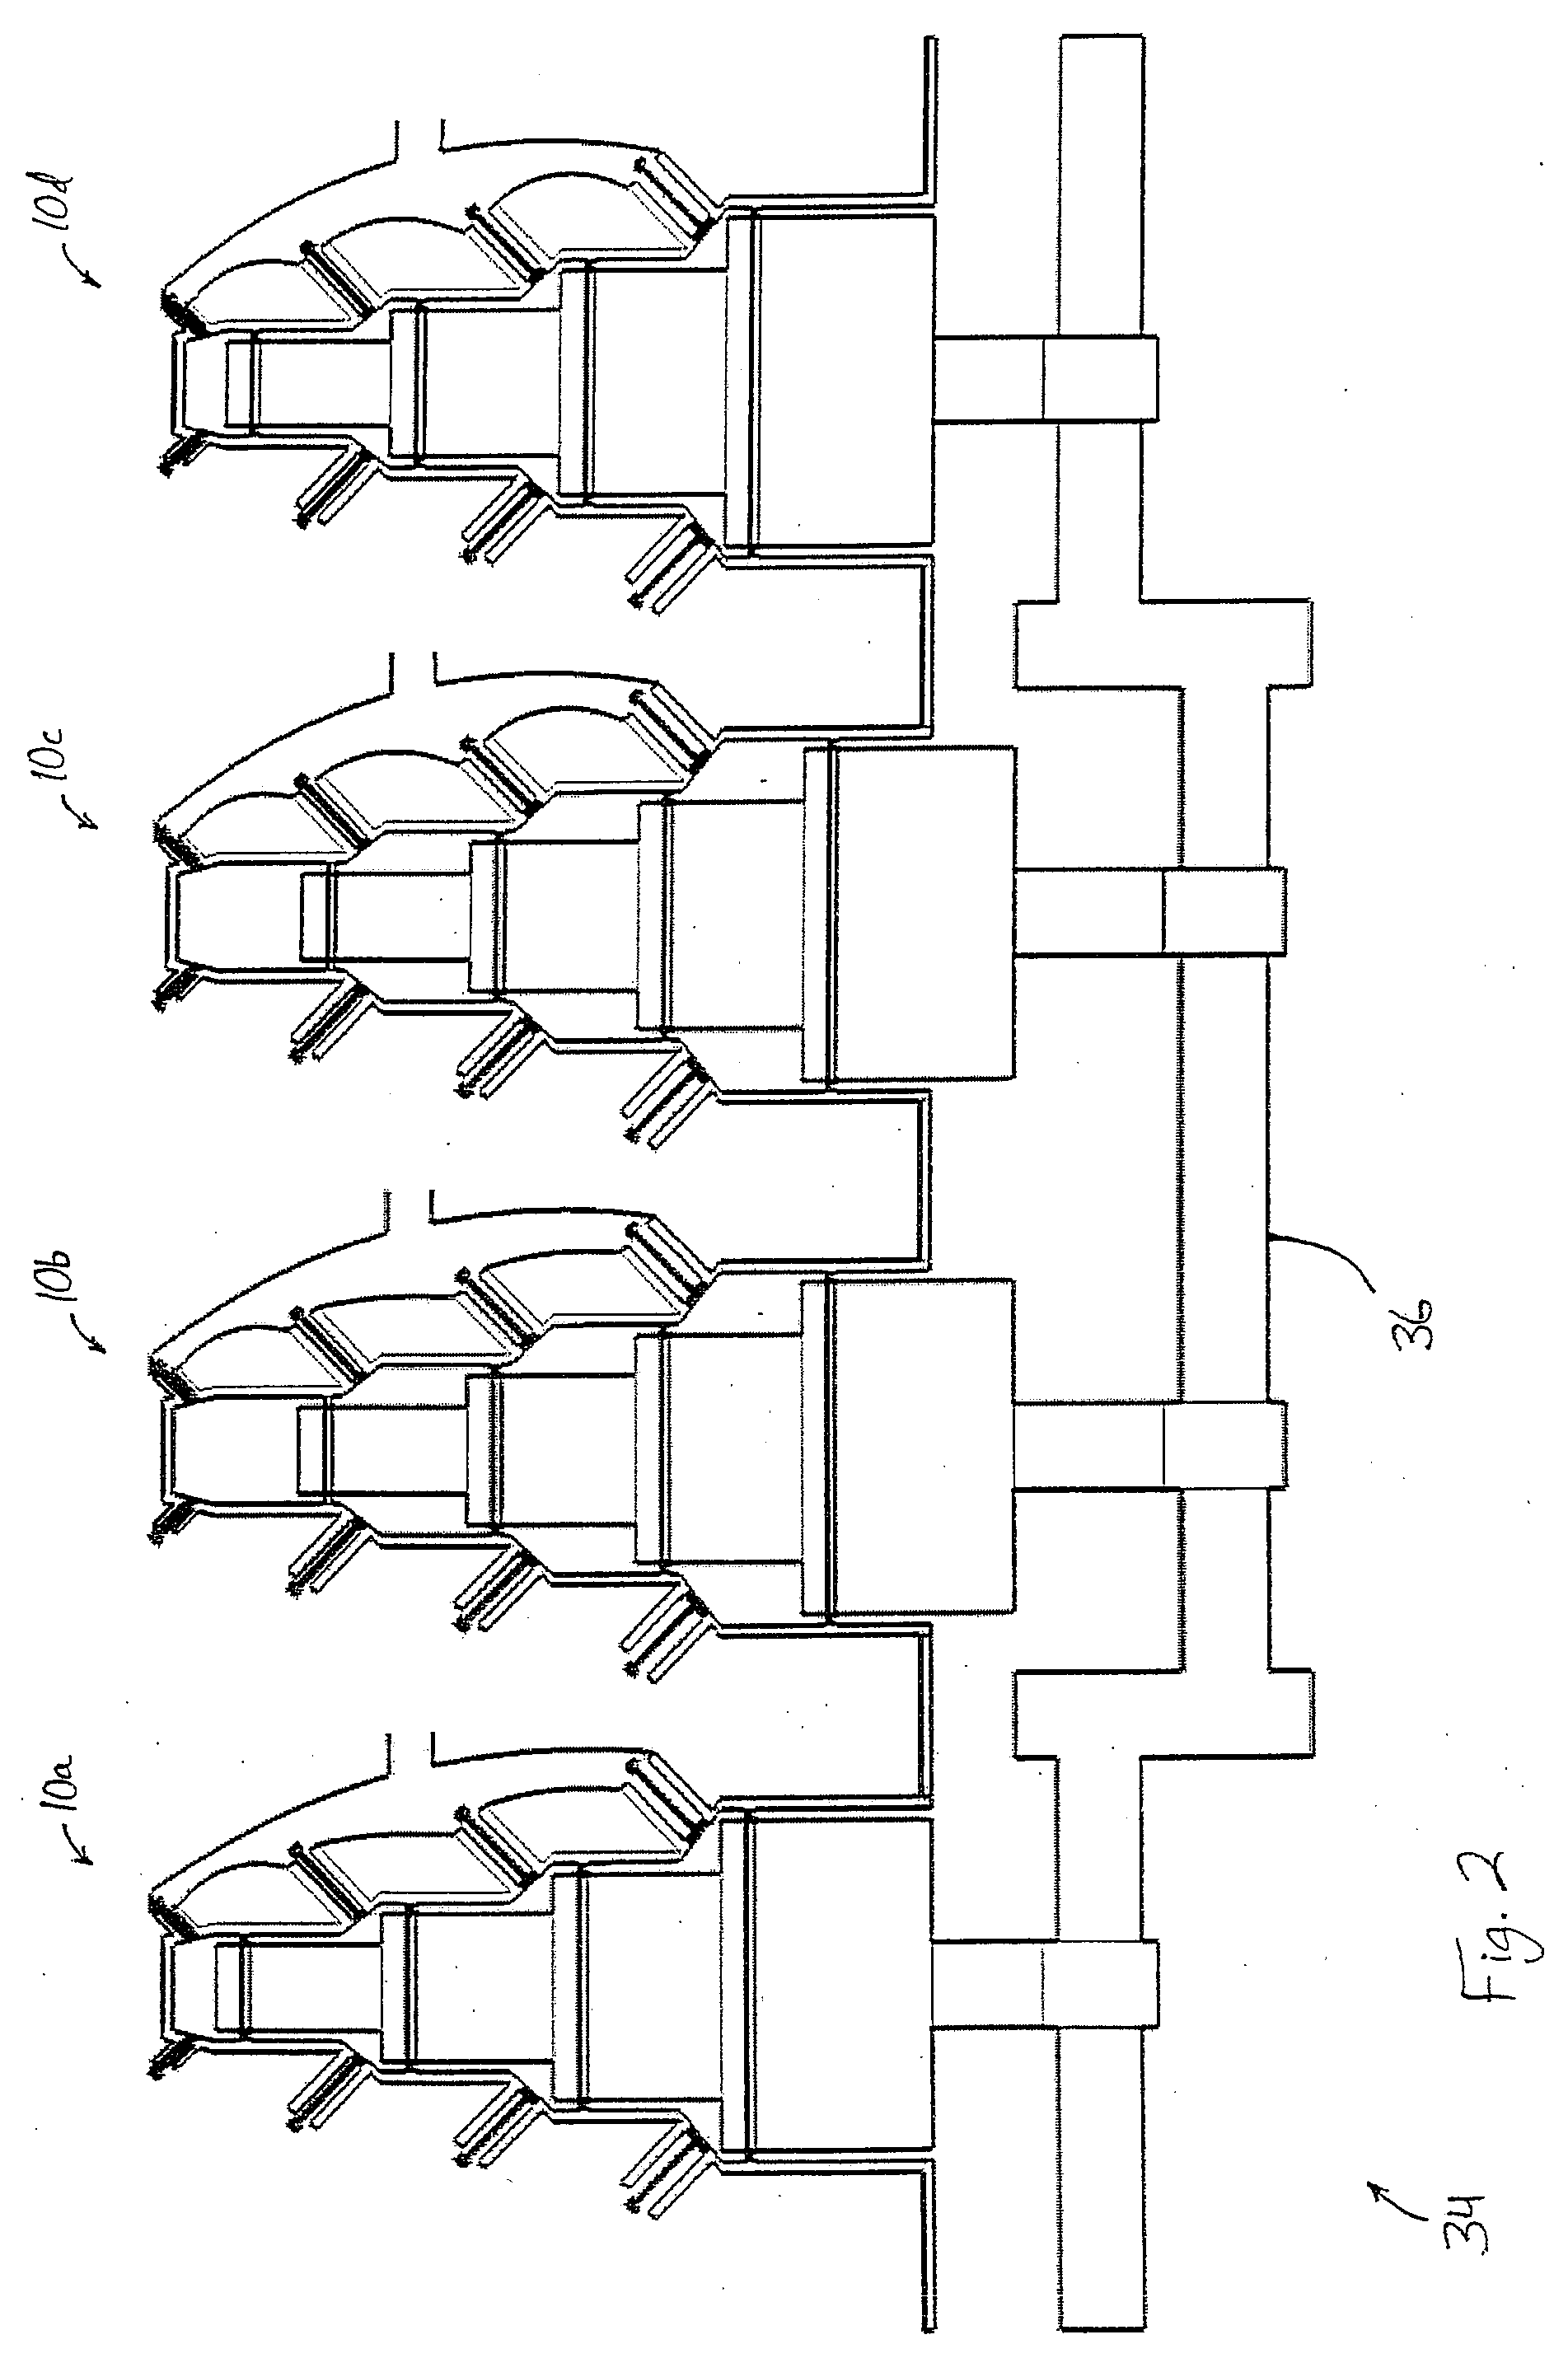 Variable-displacement piston-cylinder device